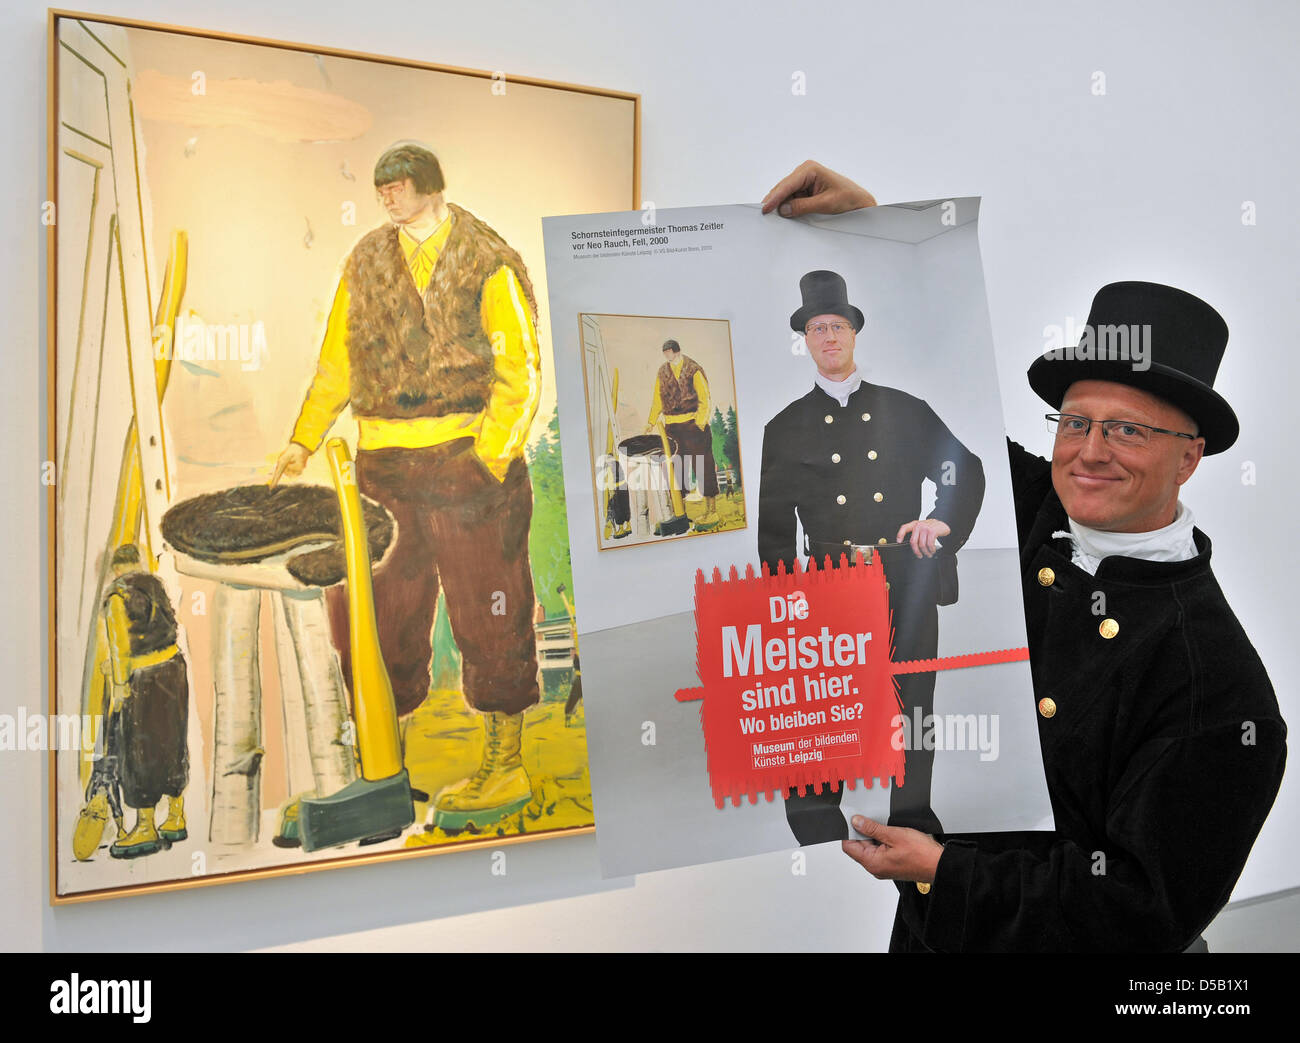 Chimney sweep master craftsman Thomas Zeitler from Leipzig presents a poster depicting himself in front of the Neo Rauch painting 'Fur' at the Museum of Fine Arts in Leipzig, Germany, 2 August 2010. The poster is part of the campaign 'The masters are here. Where are you?', which wants to attract more visitors from the local area. Twelve master craftsmen have been photographed in fr Stock Photo